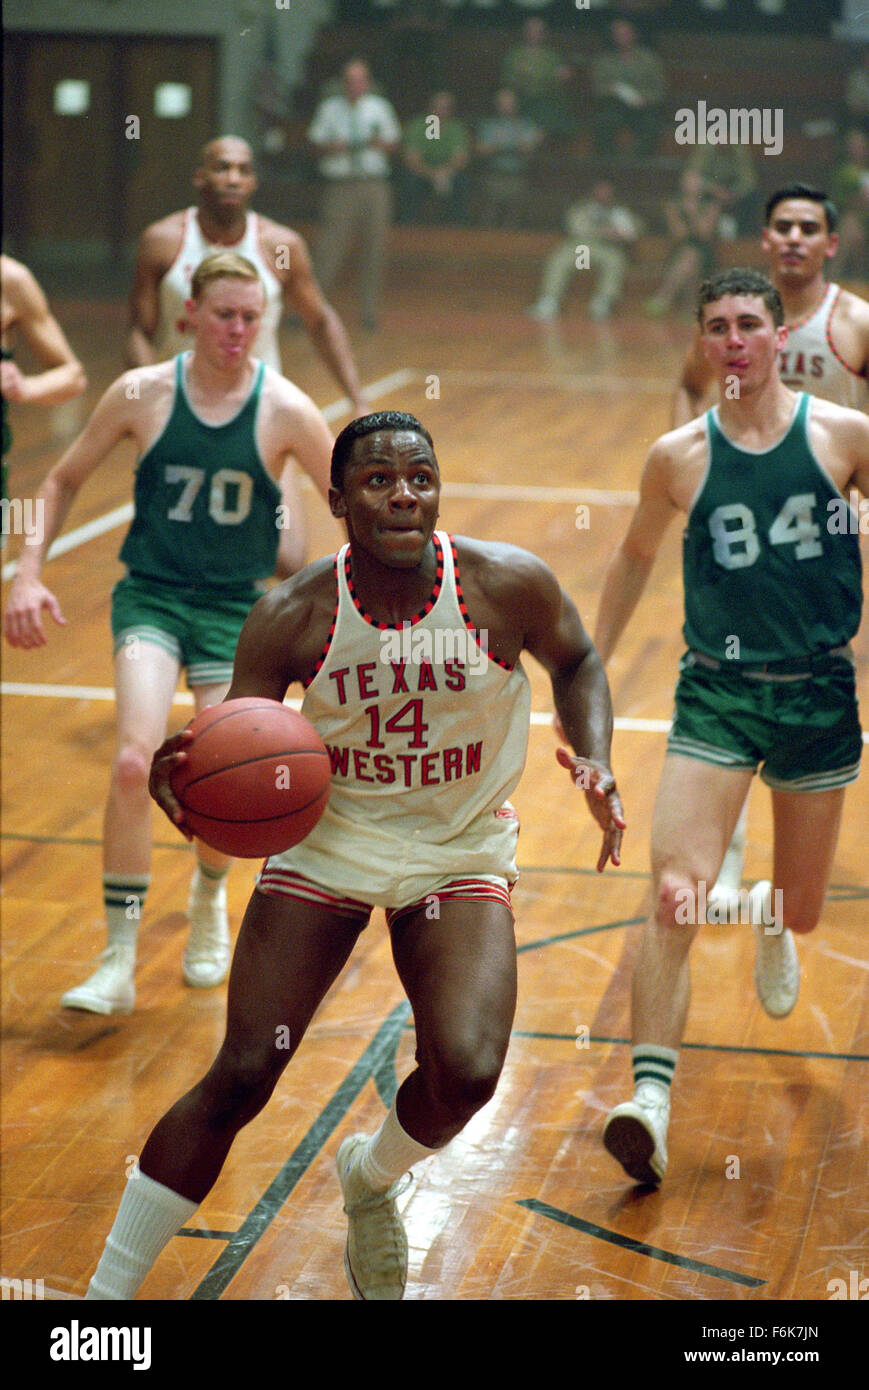 RELEASE DATE: Jan 11, 2006;STUDIO: Walt Disney Pictures. PLOT: In 1966, Texas Western coach Don Haskins led the first all-black starting line-up for a college basketball team to the NCAA national championship. PICTURED: DEREK LUKE as Bobby Joe Hill. Stock Photo